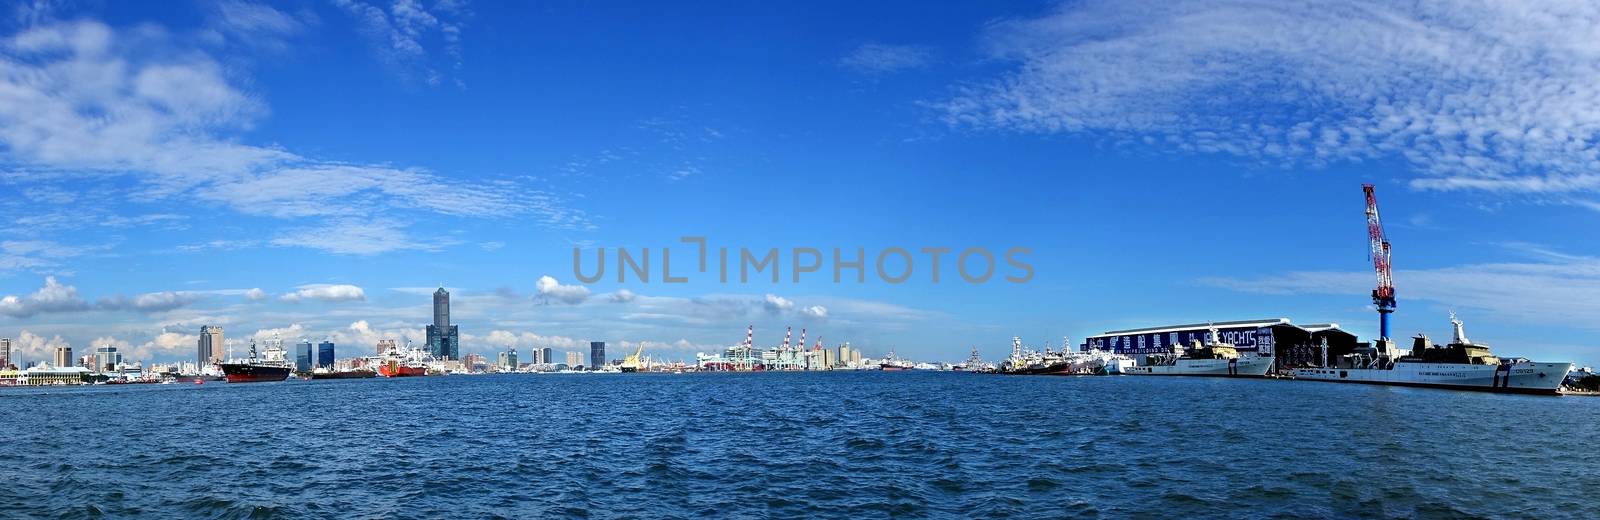 KAOHSIUNG, TAIWAN -- MAY 11, 2014: A super wide panoramic view of Kaohsiung city and port 